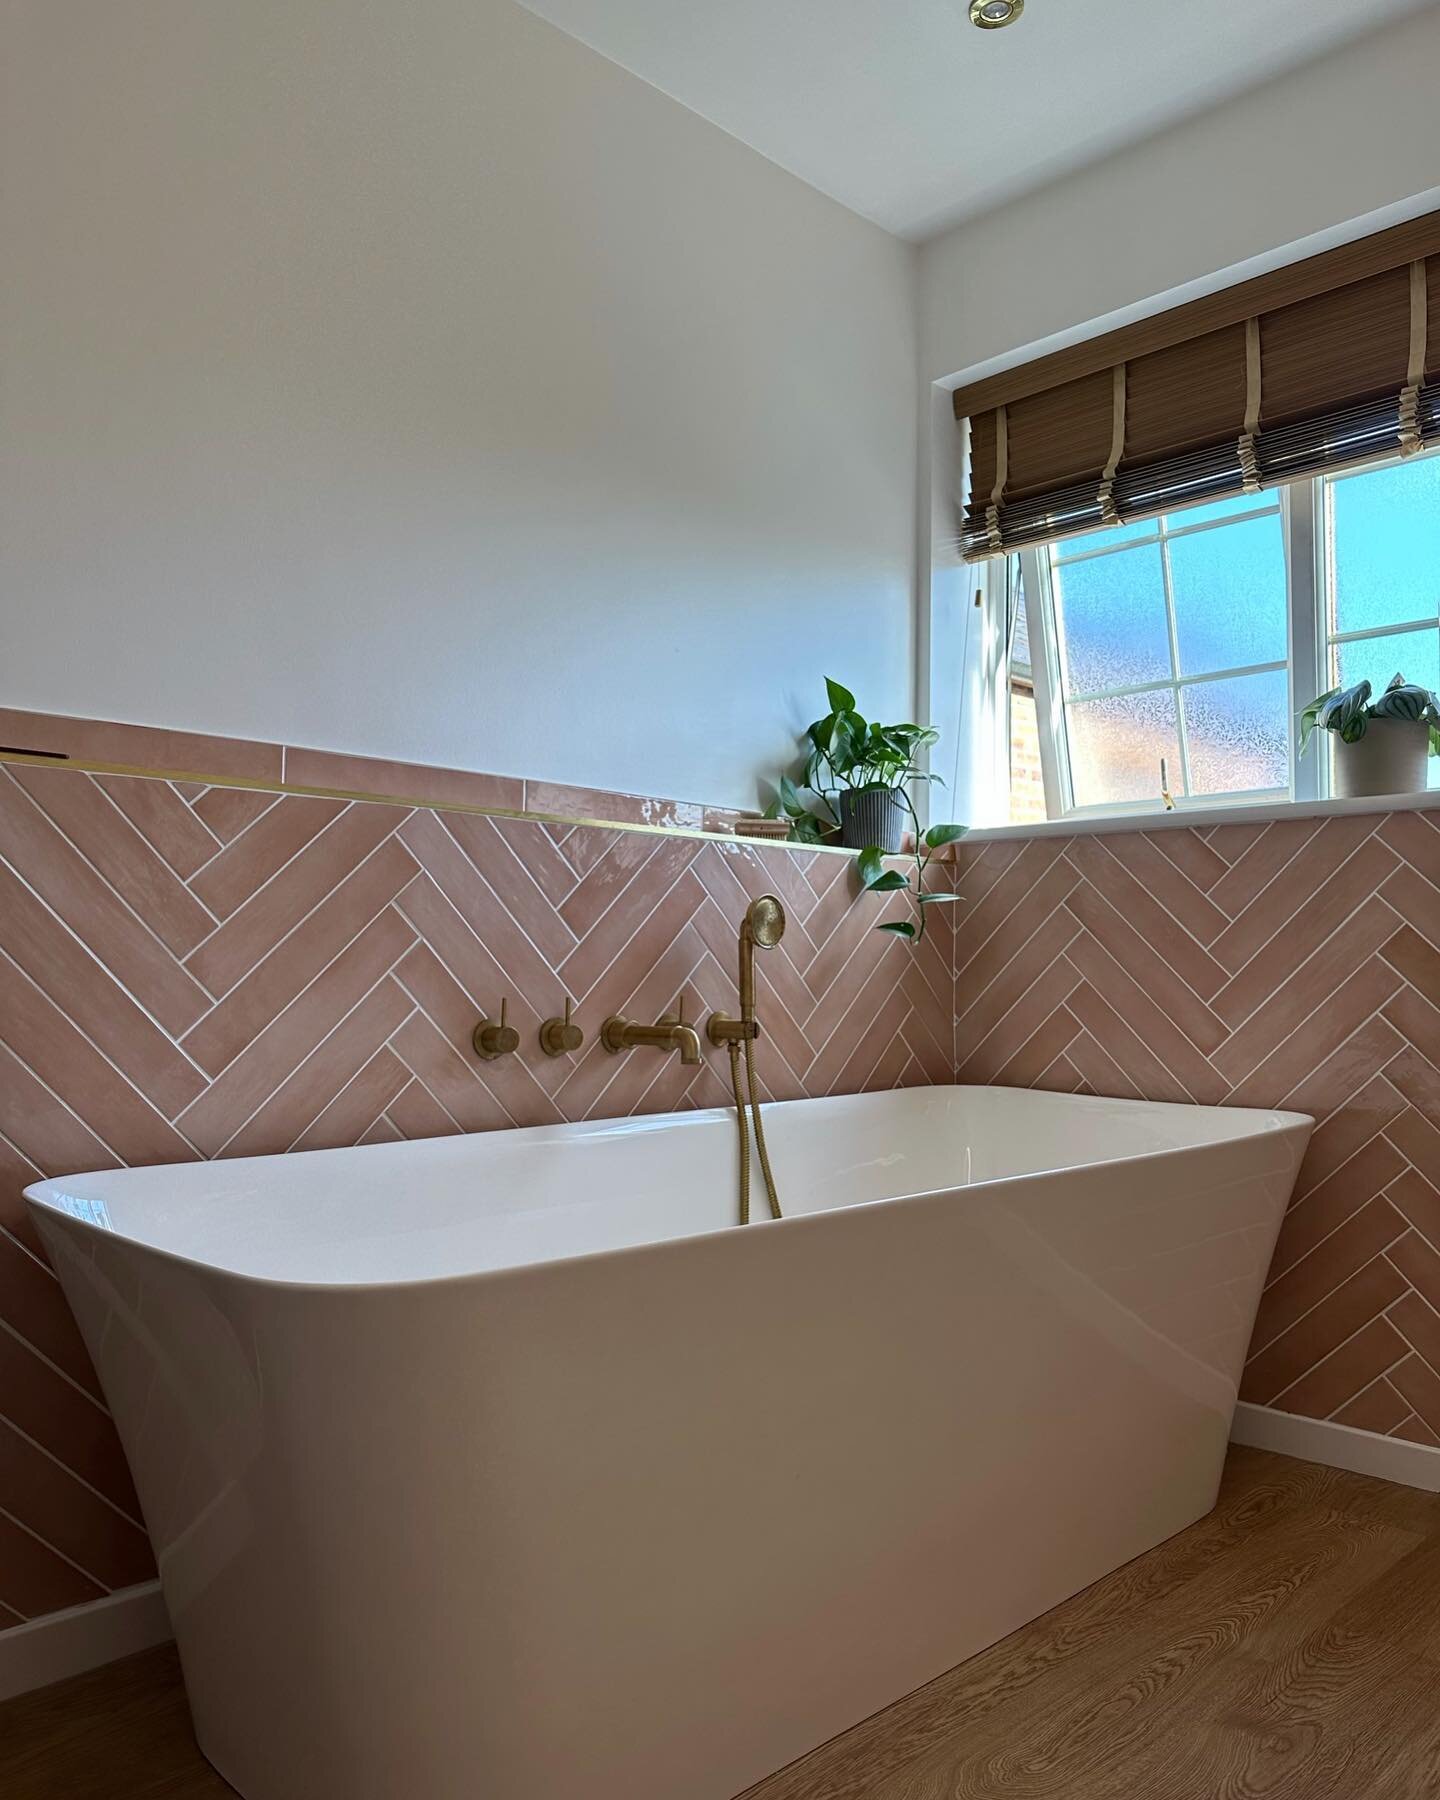 In this family bathroom, our clients chose a striking combination of pink tiles with soft accents of brass throughout. We just love how these beautiful tiles inject vibrancy, texture and character into the bathroom interior. It sure is the perfect pl